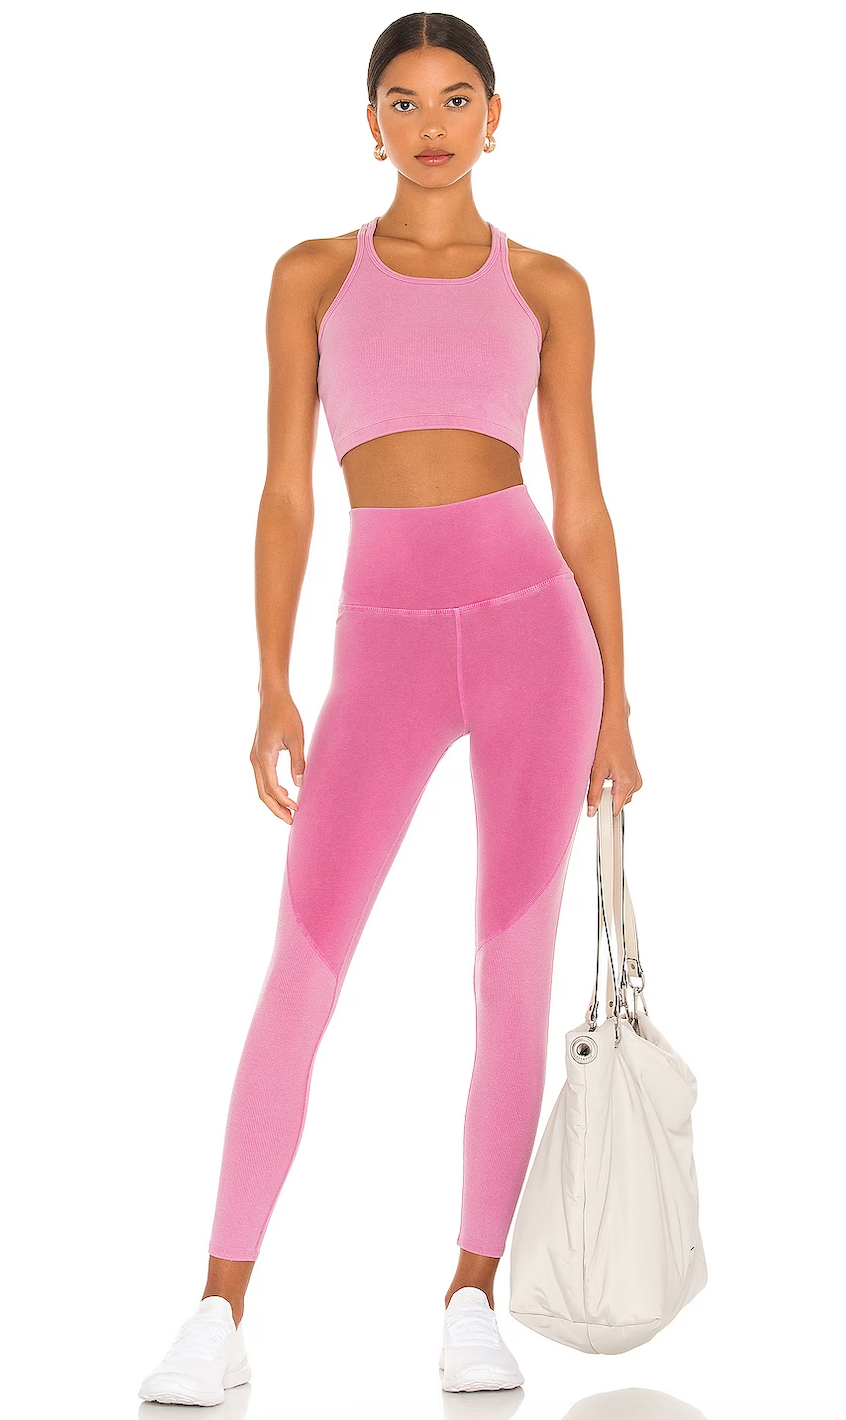 Fit, Fabulous, and Fashionable: How Cute Workout Outfits Empower Your Fitness Journey